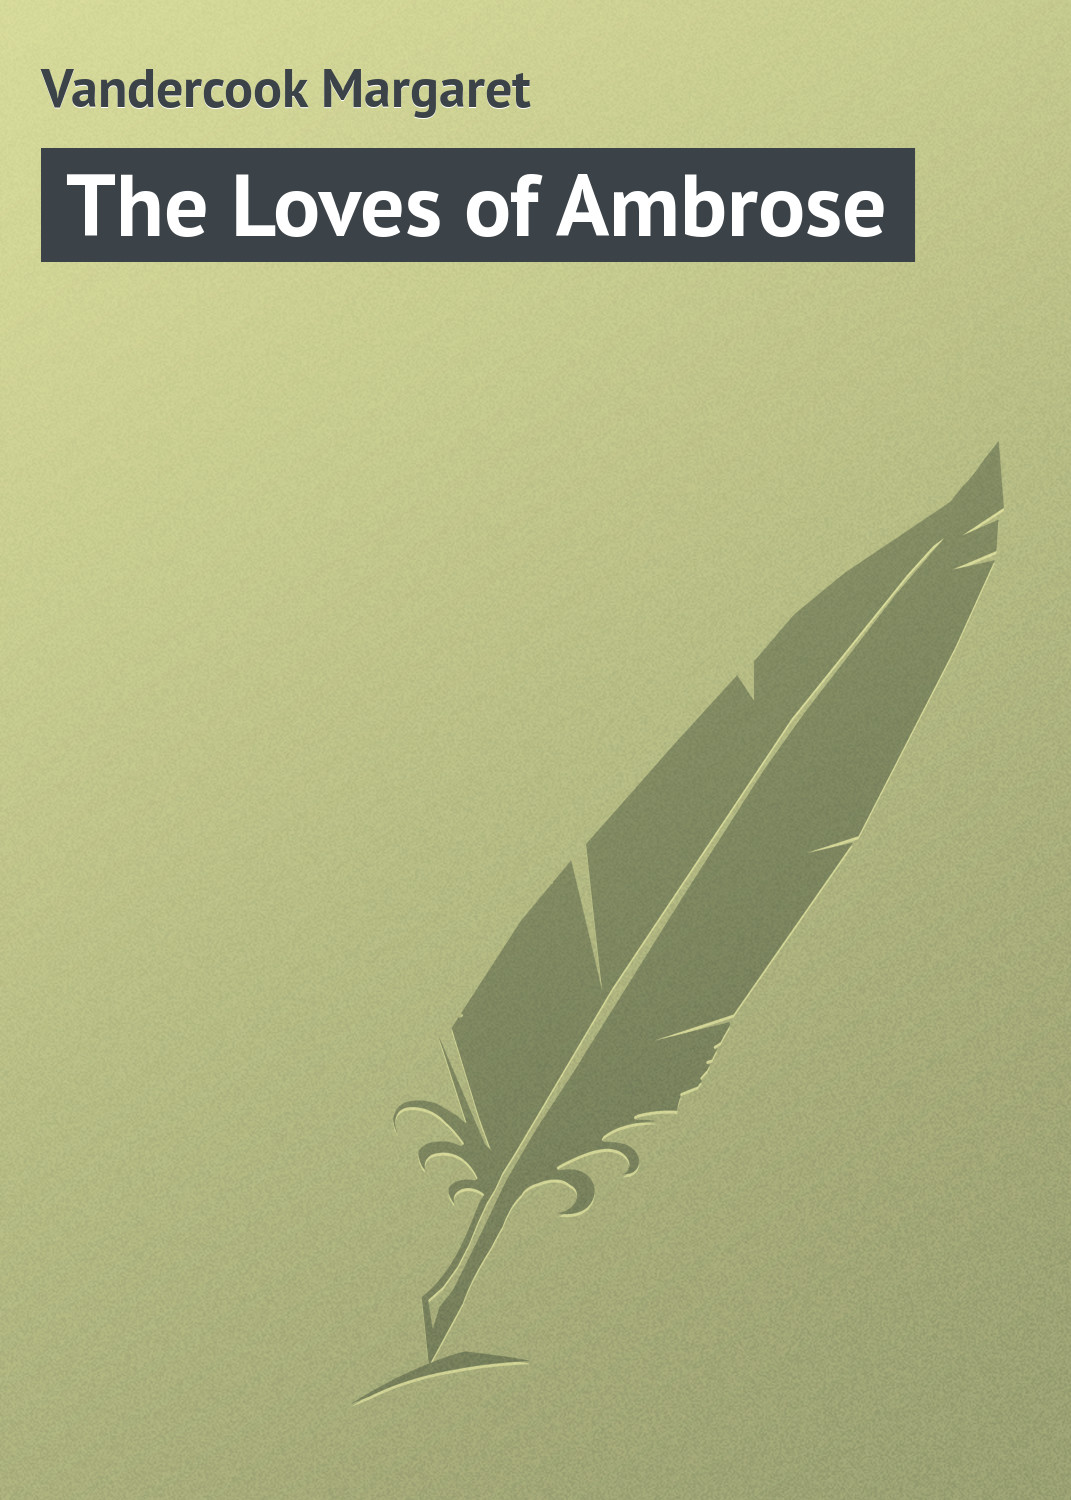 The Loves of Ambrose